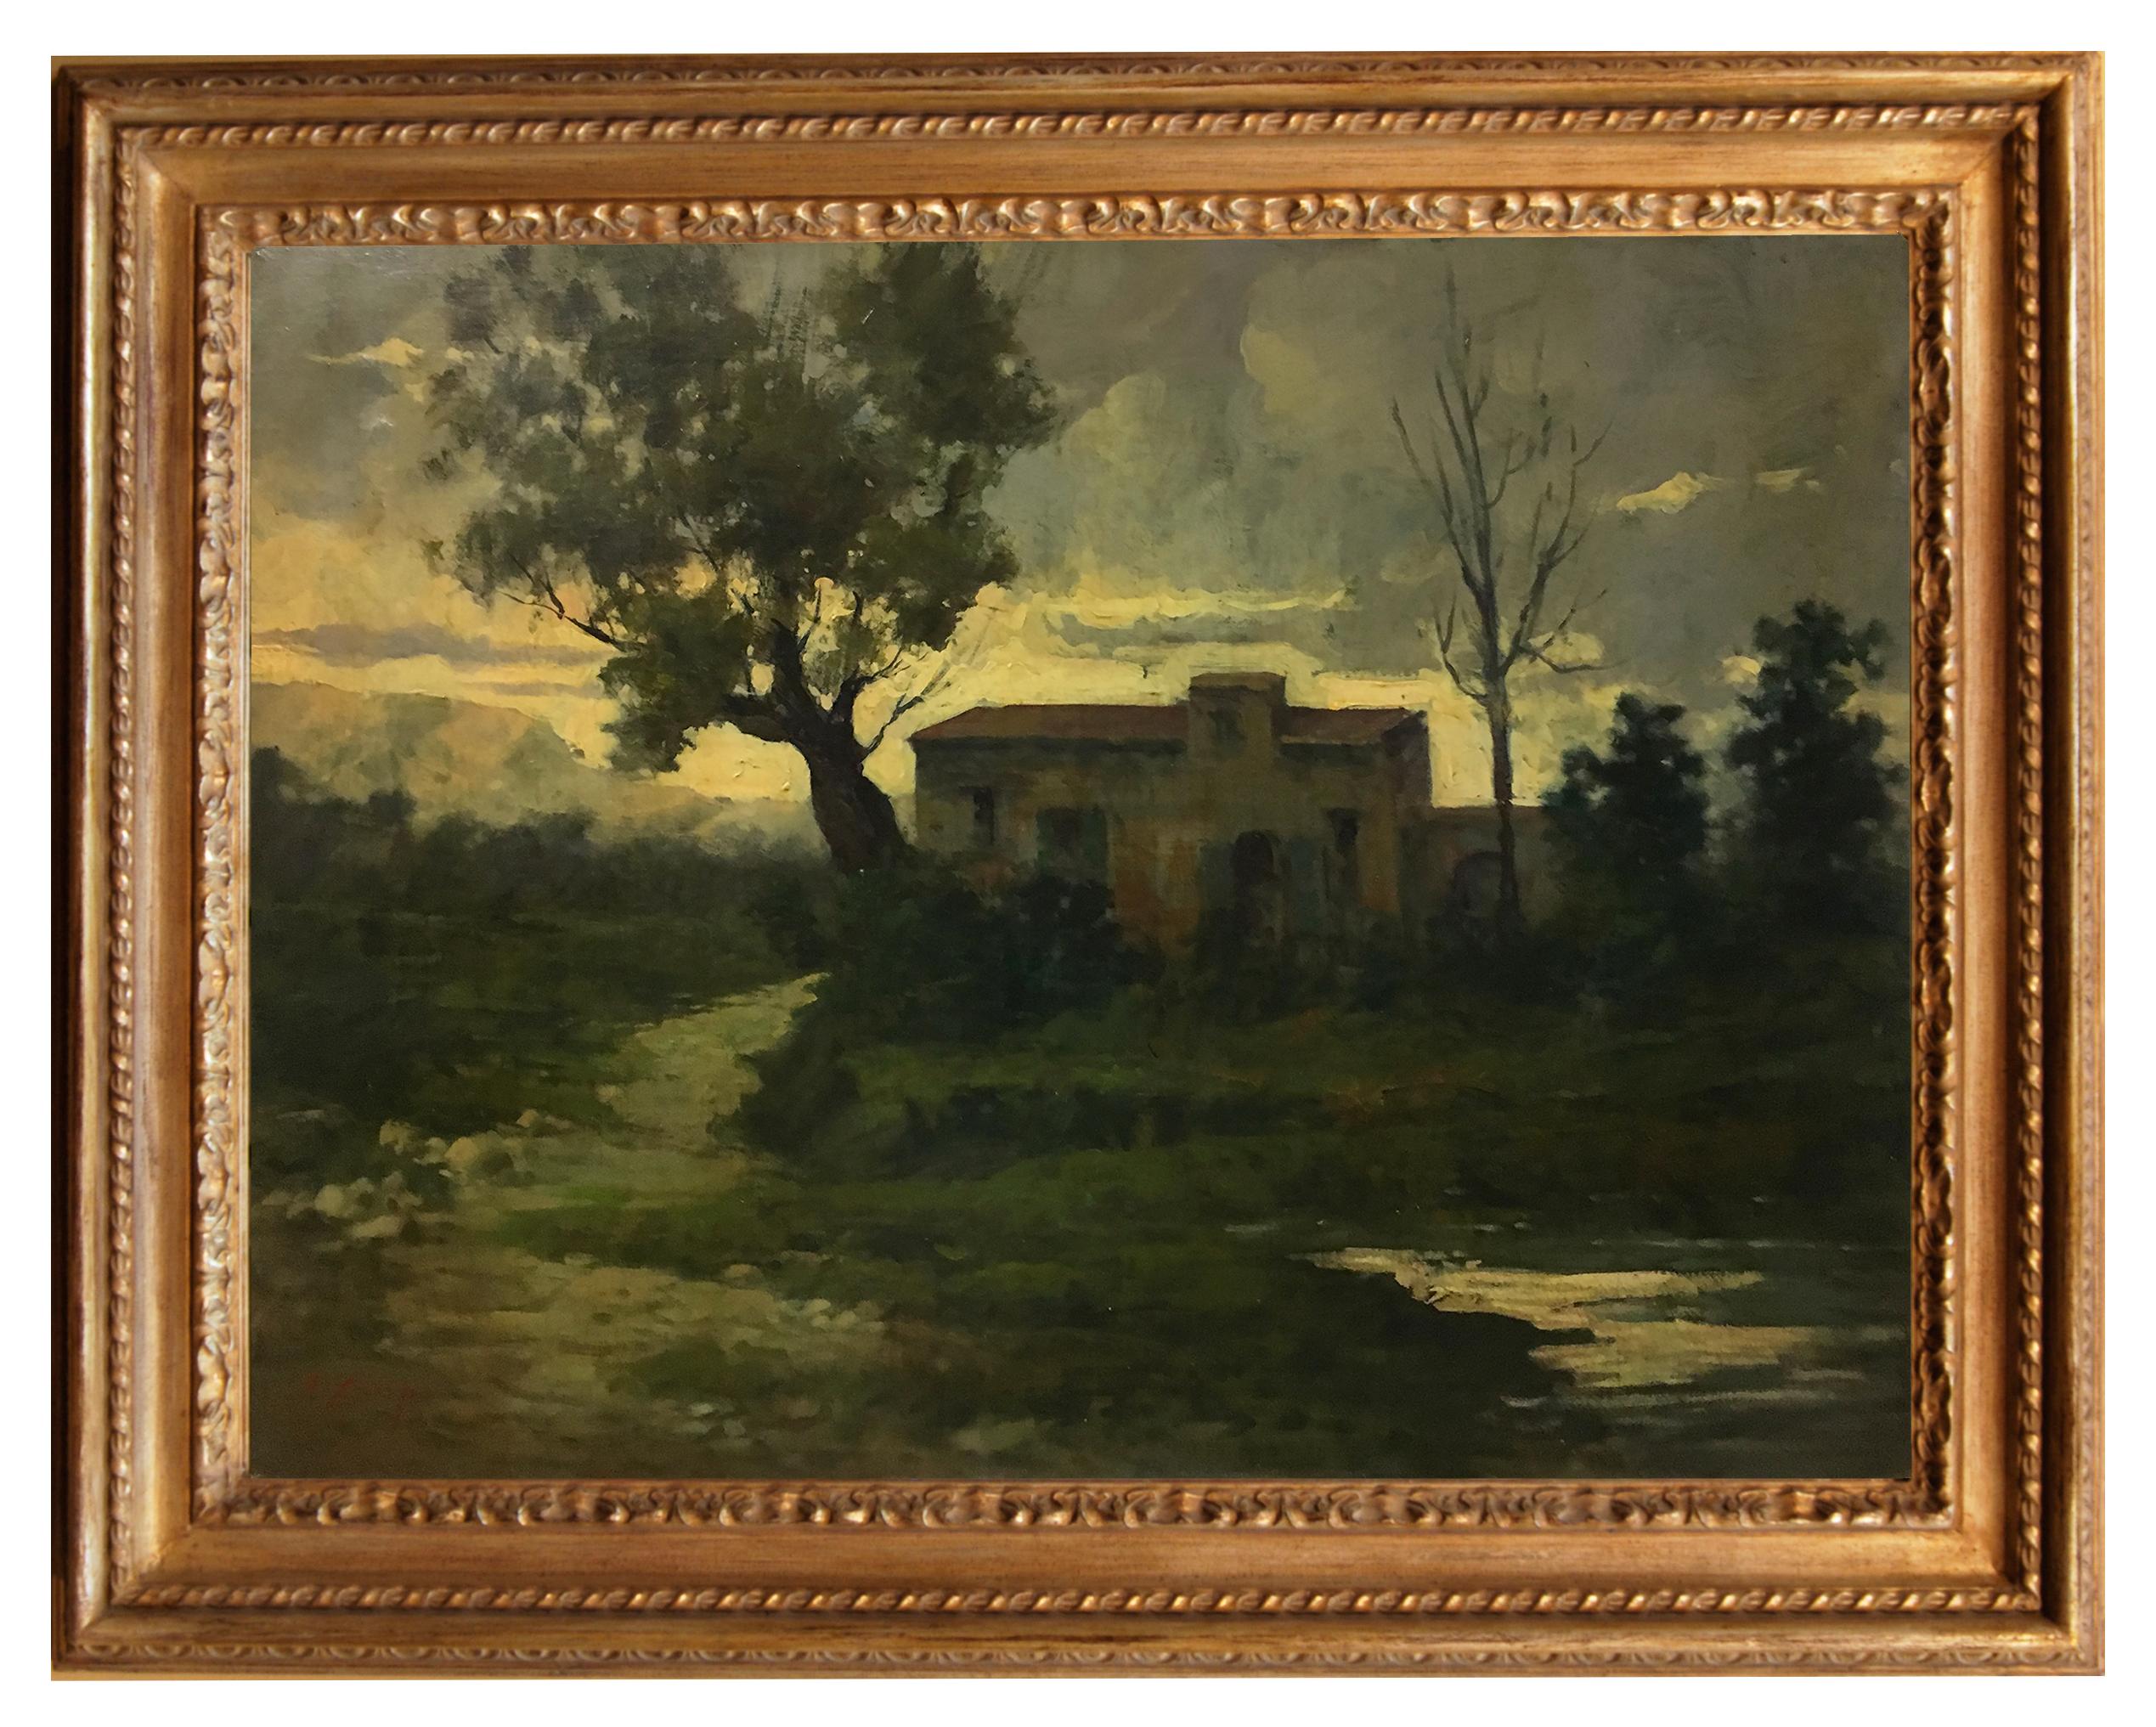 COUNTRY LANDSCAPE - Italian Oil on Canvas Painting.